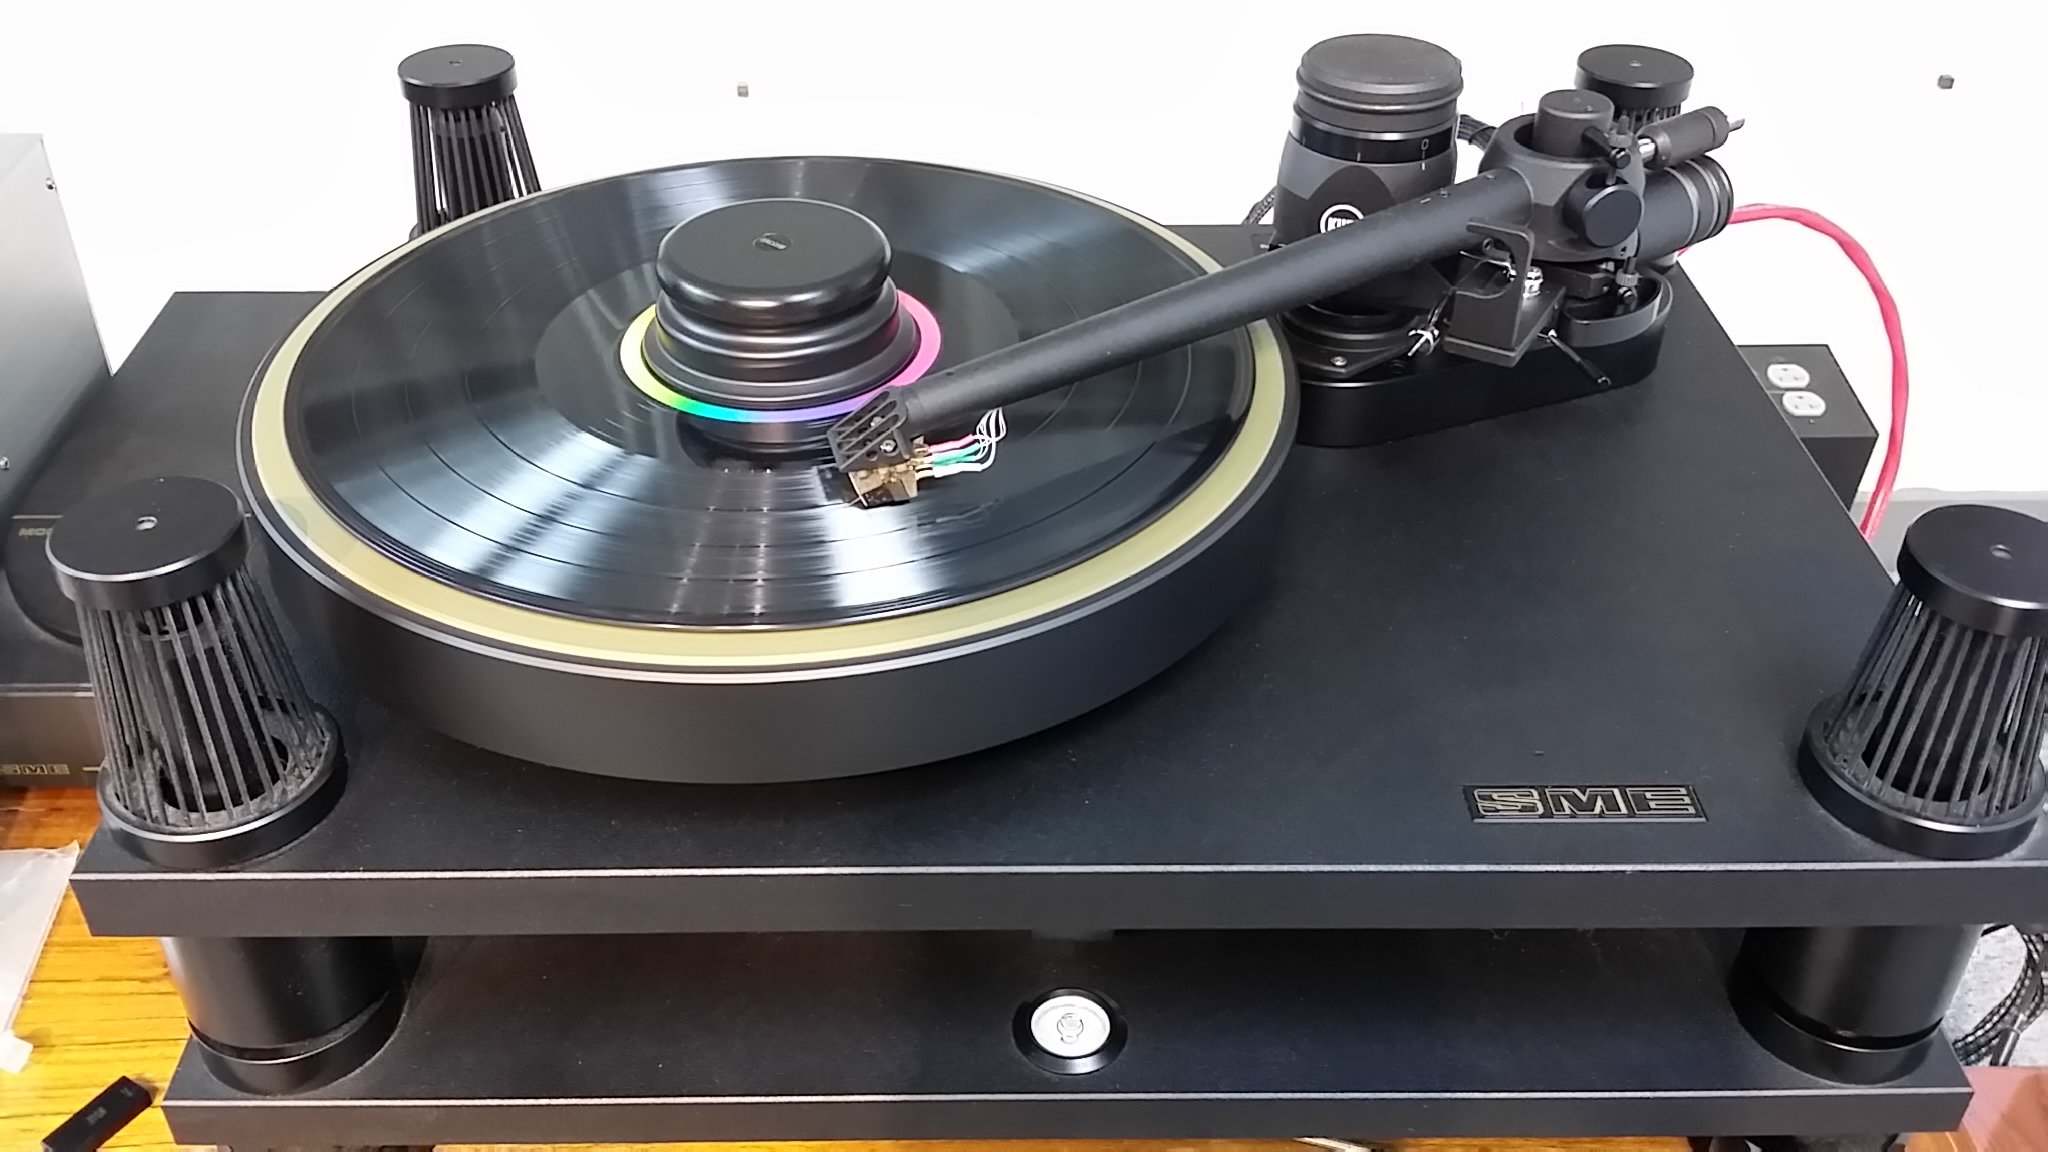 4Point - Kuzma Professional Turntables, Tonearms and Accessories